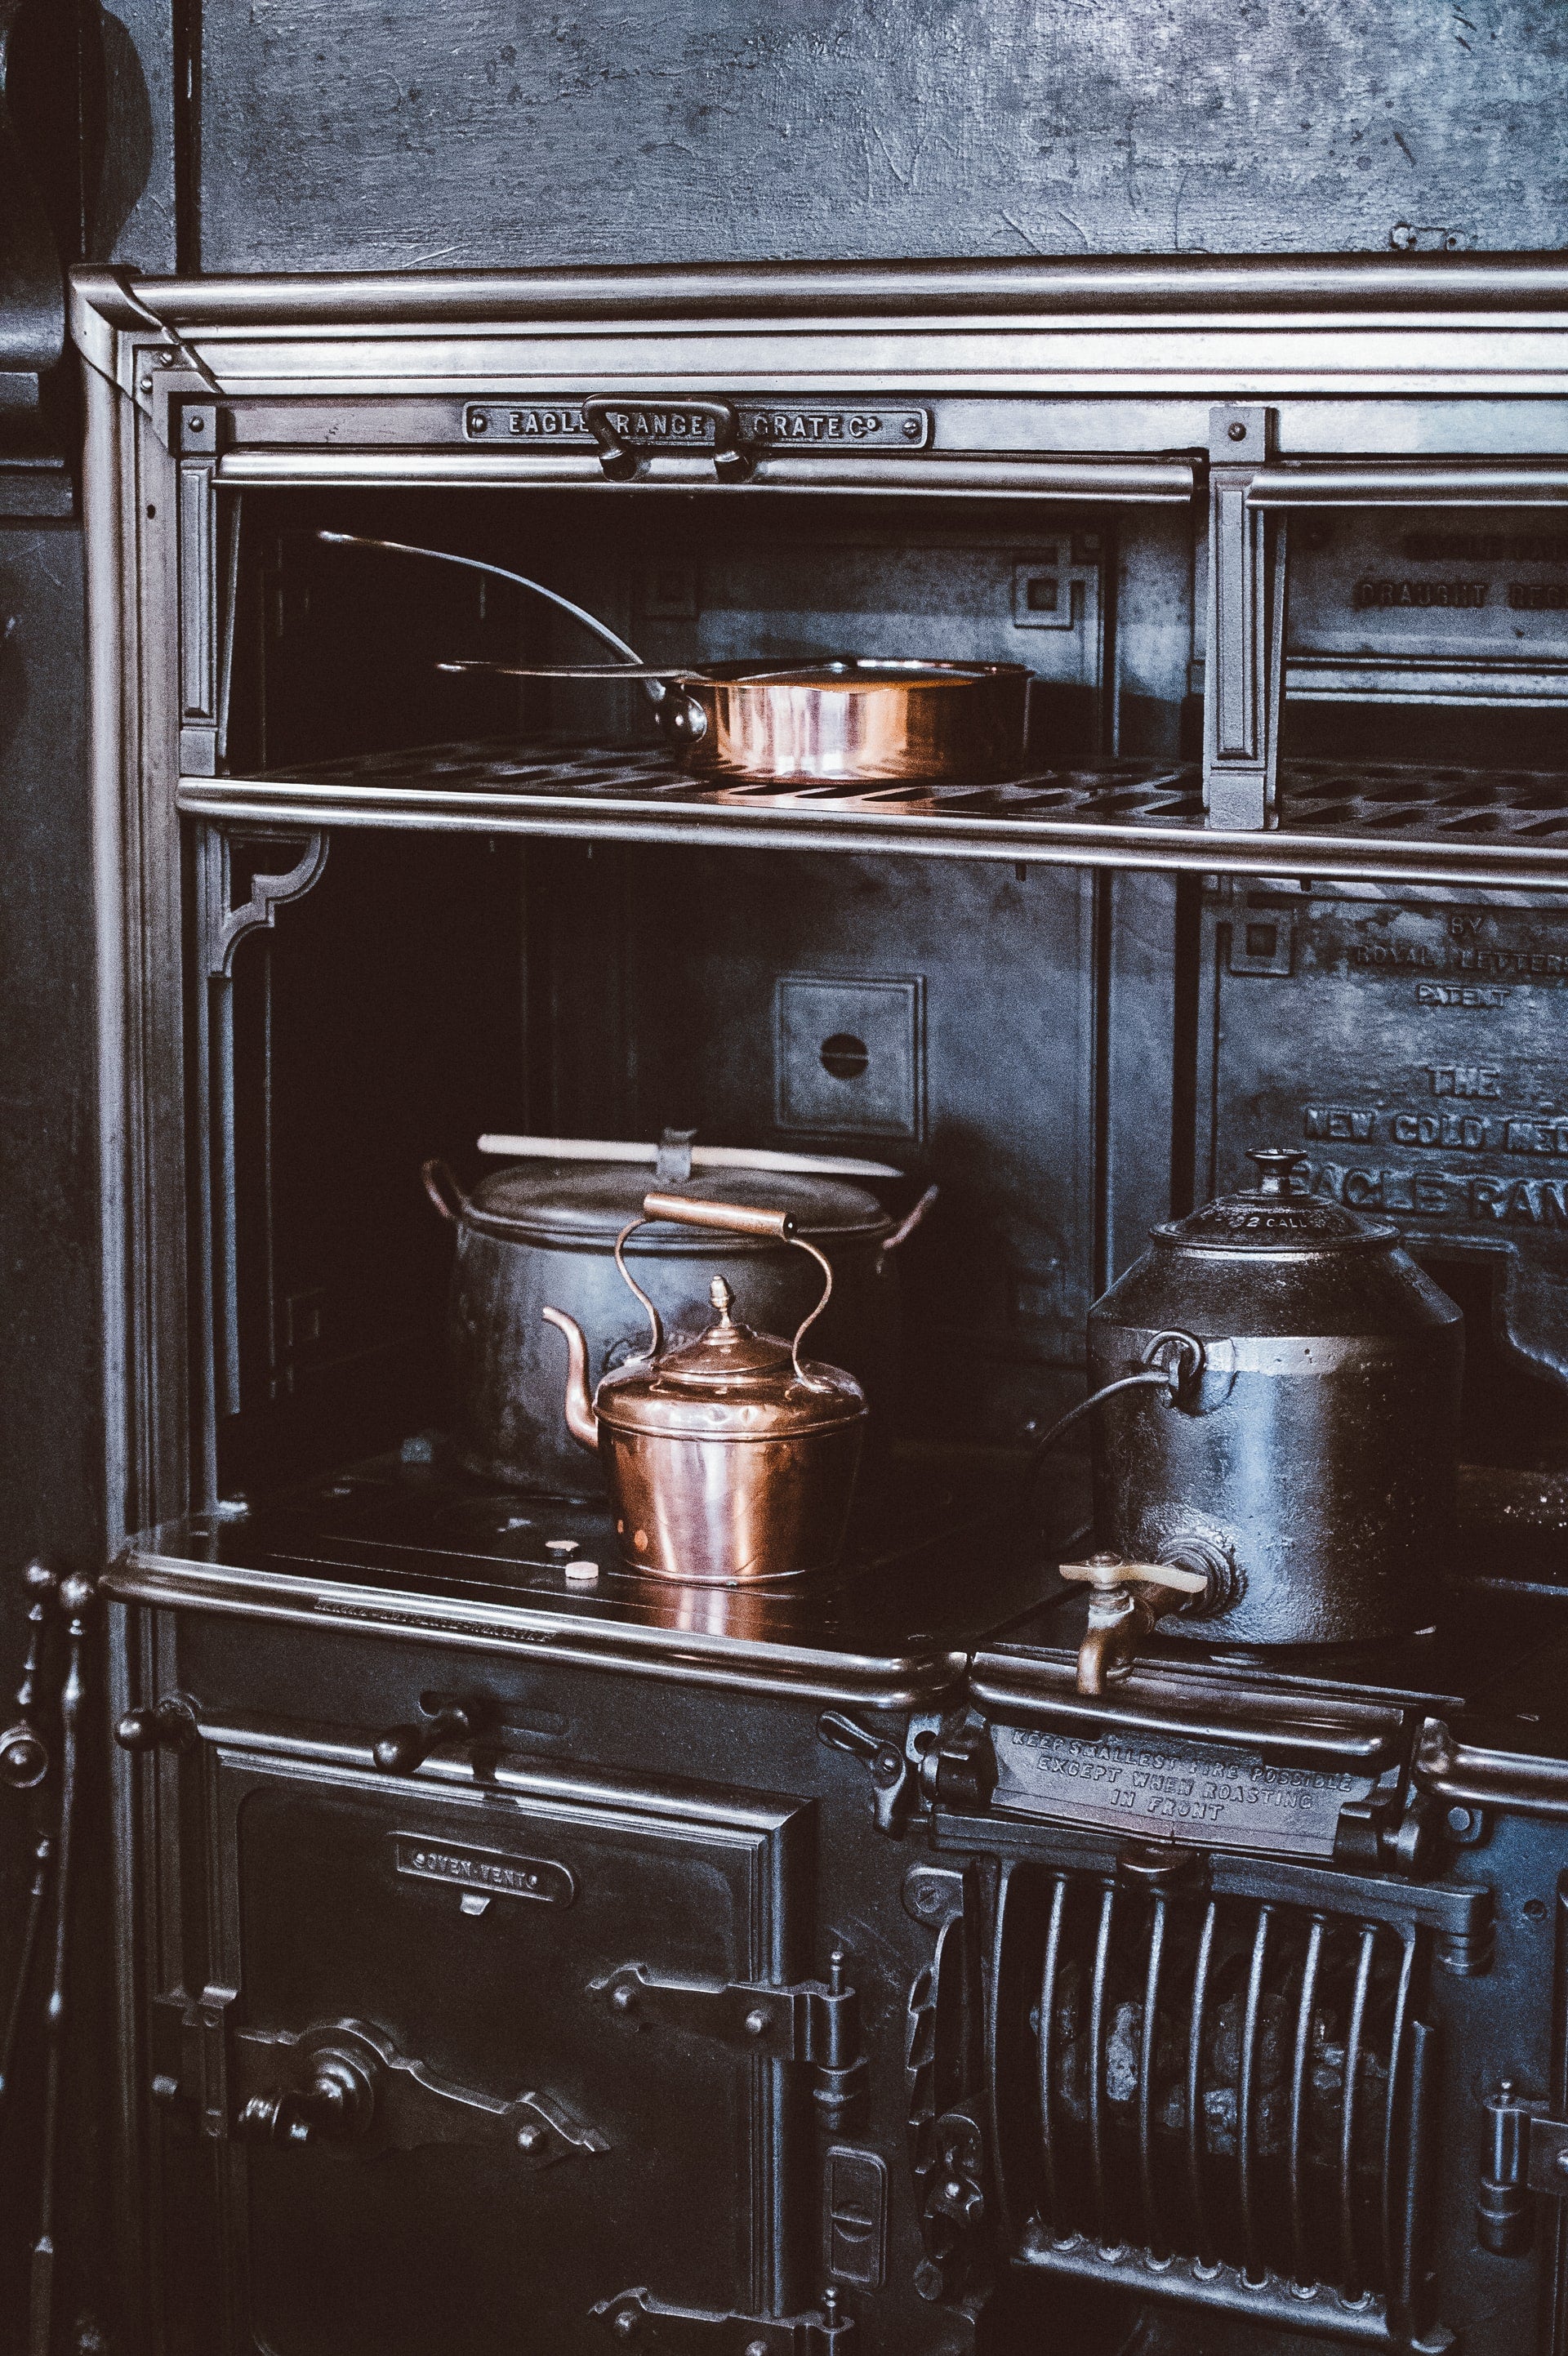 FOOD-SAFE STAINLESS STEEL: UNDERSTANDING THE DIFFERENT TYPES